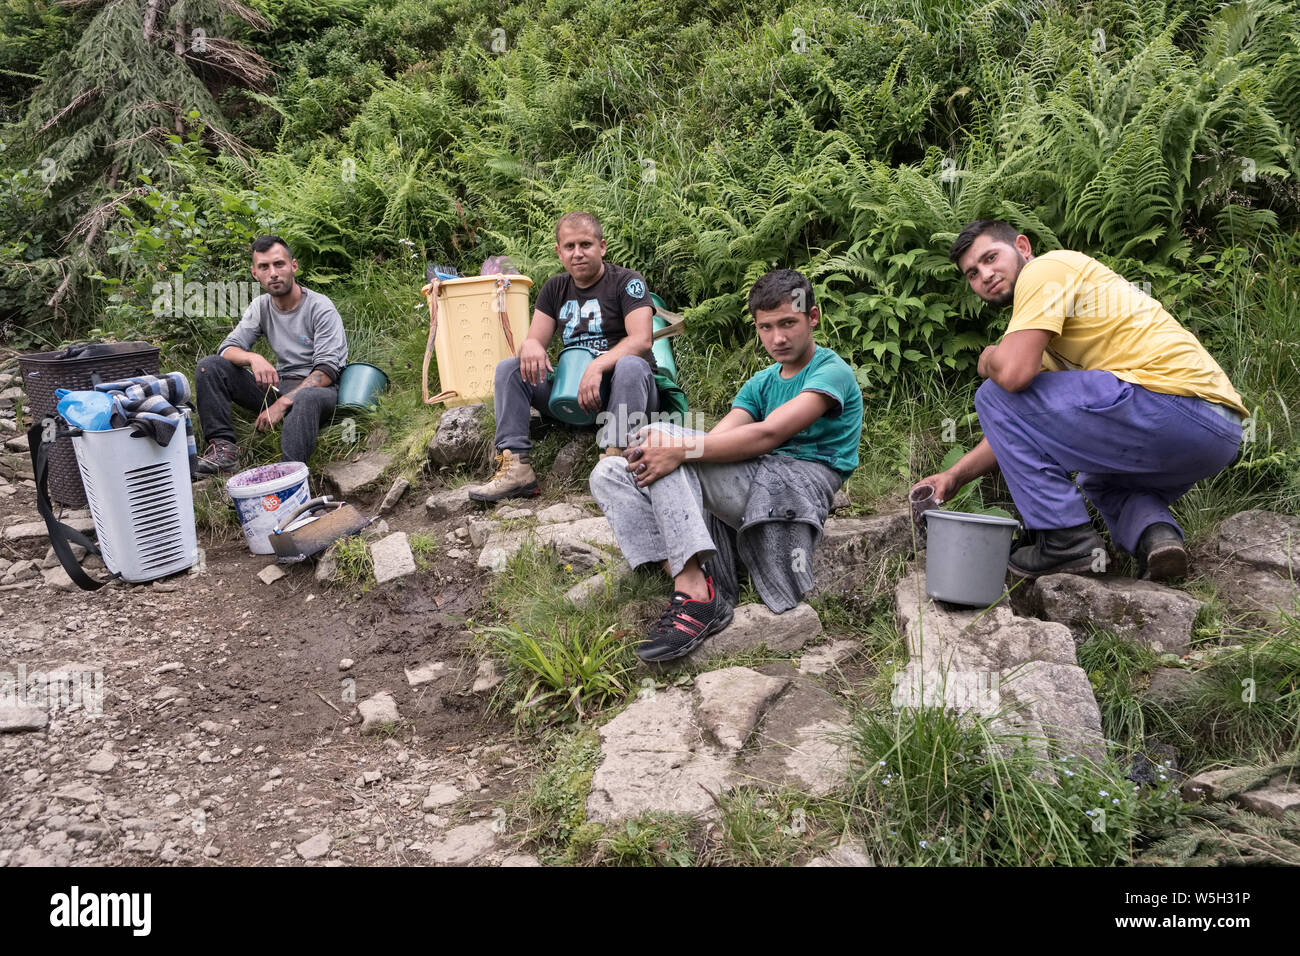 Maramureş, Romania - in the mountains a group of Roma (gypsy) men picking wild bilberries (whinberries, European blueberries) to sell in the market Stock Photo